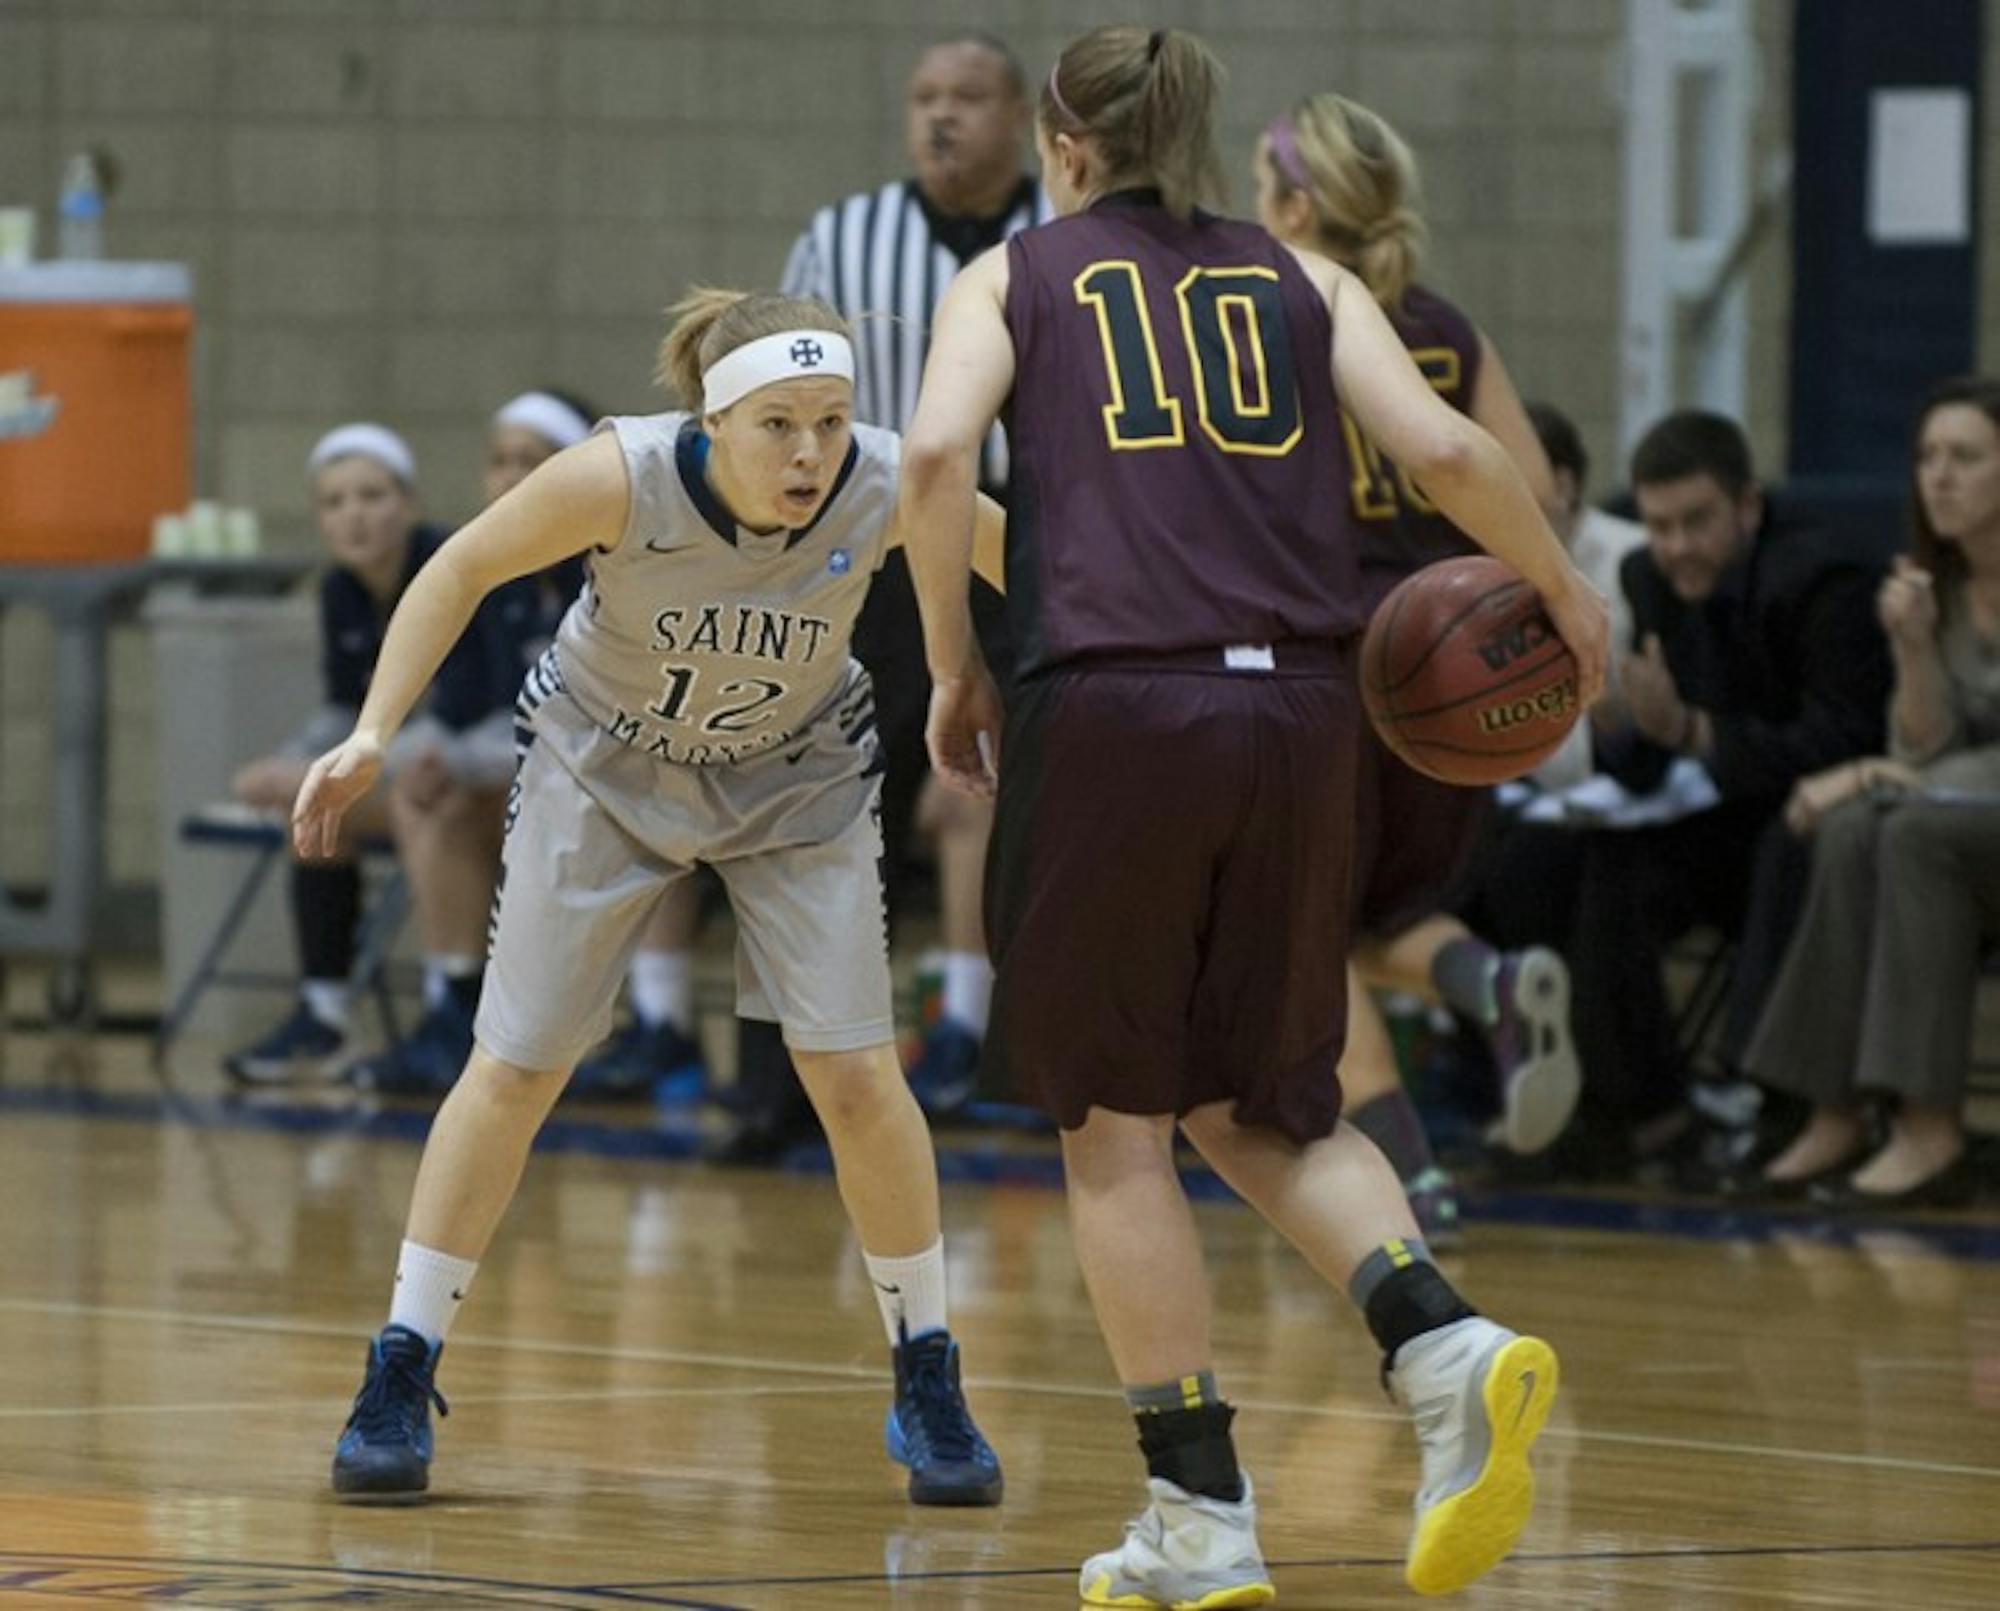 Saint Mary's sophomore guard Maddie Kohler defends during the Belles' 95-68 loss to Calvin on Jan. 15.